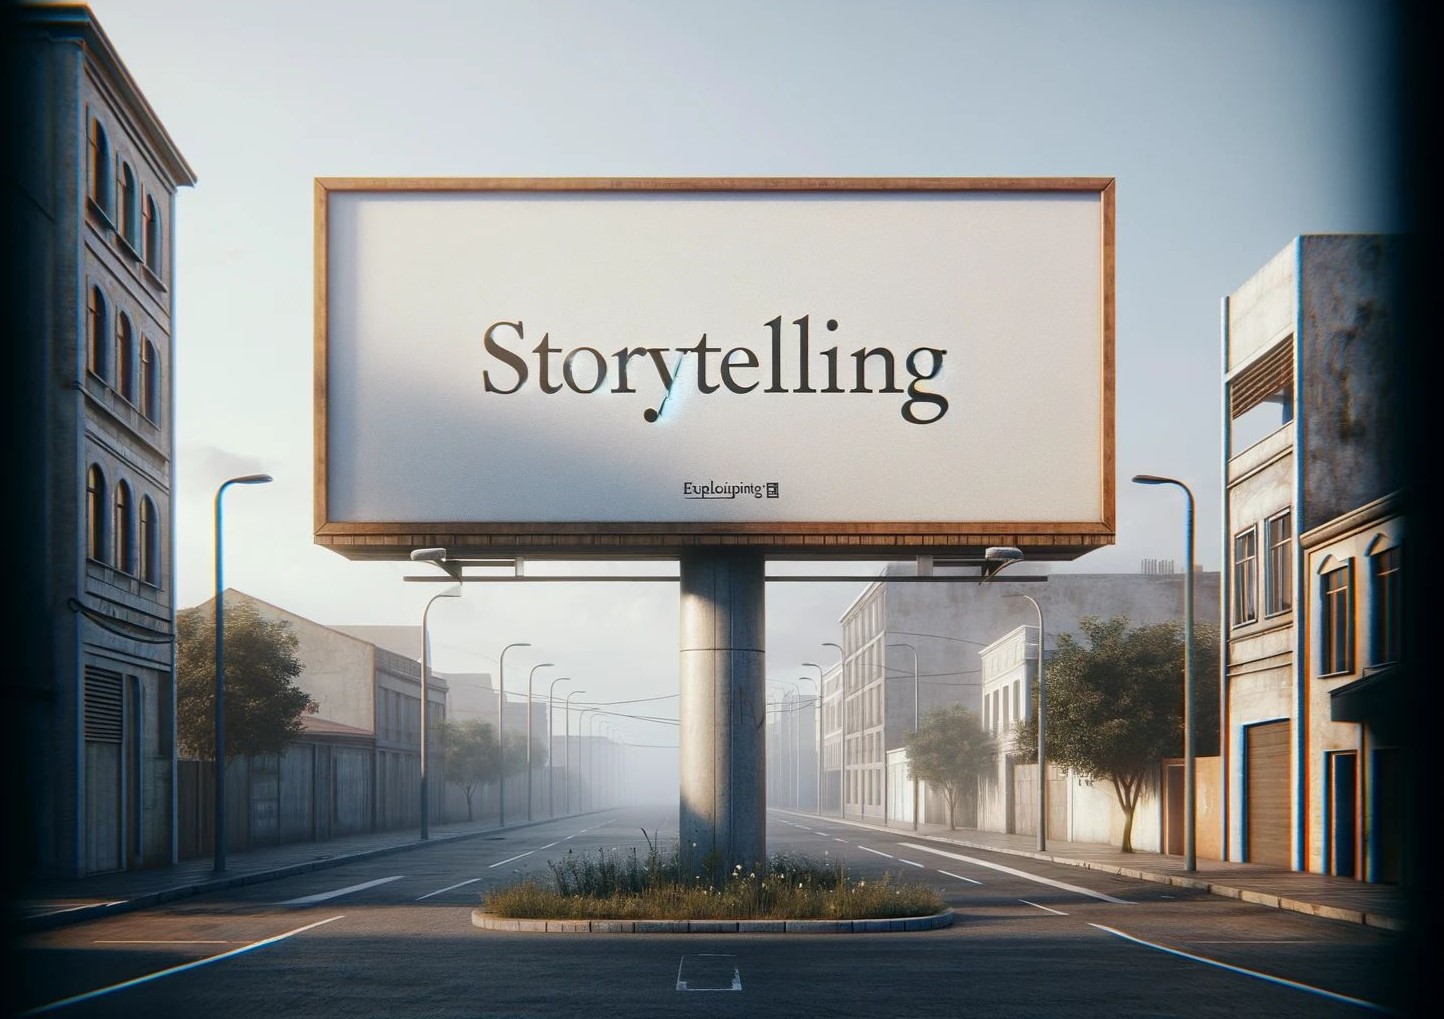 From telling to storytelling în OOH